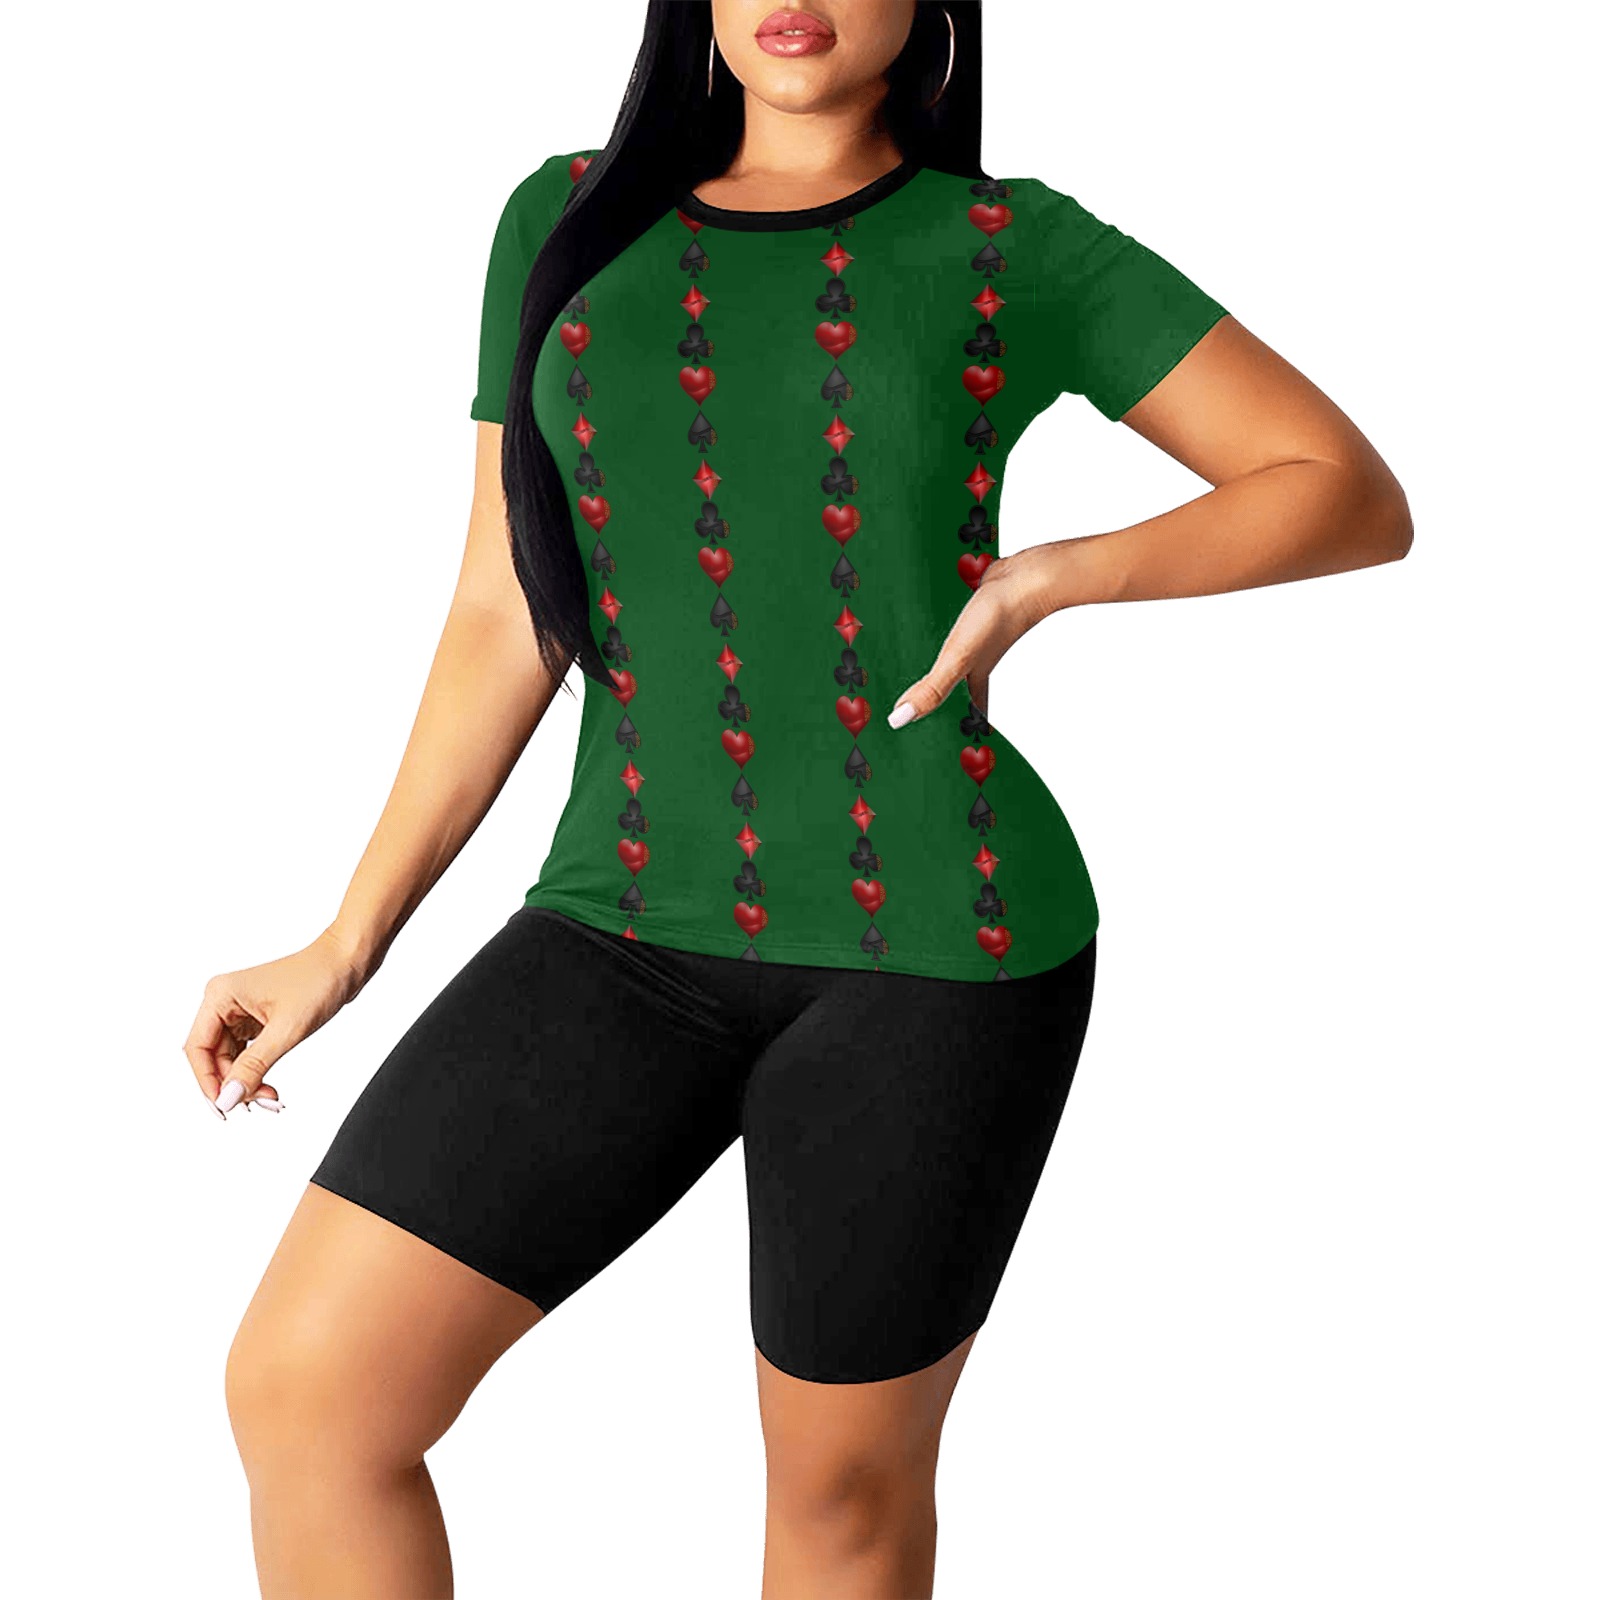 Black and Red Casino Card Shapes on Green Women's Short Yoga Set